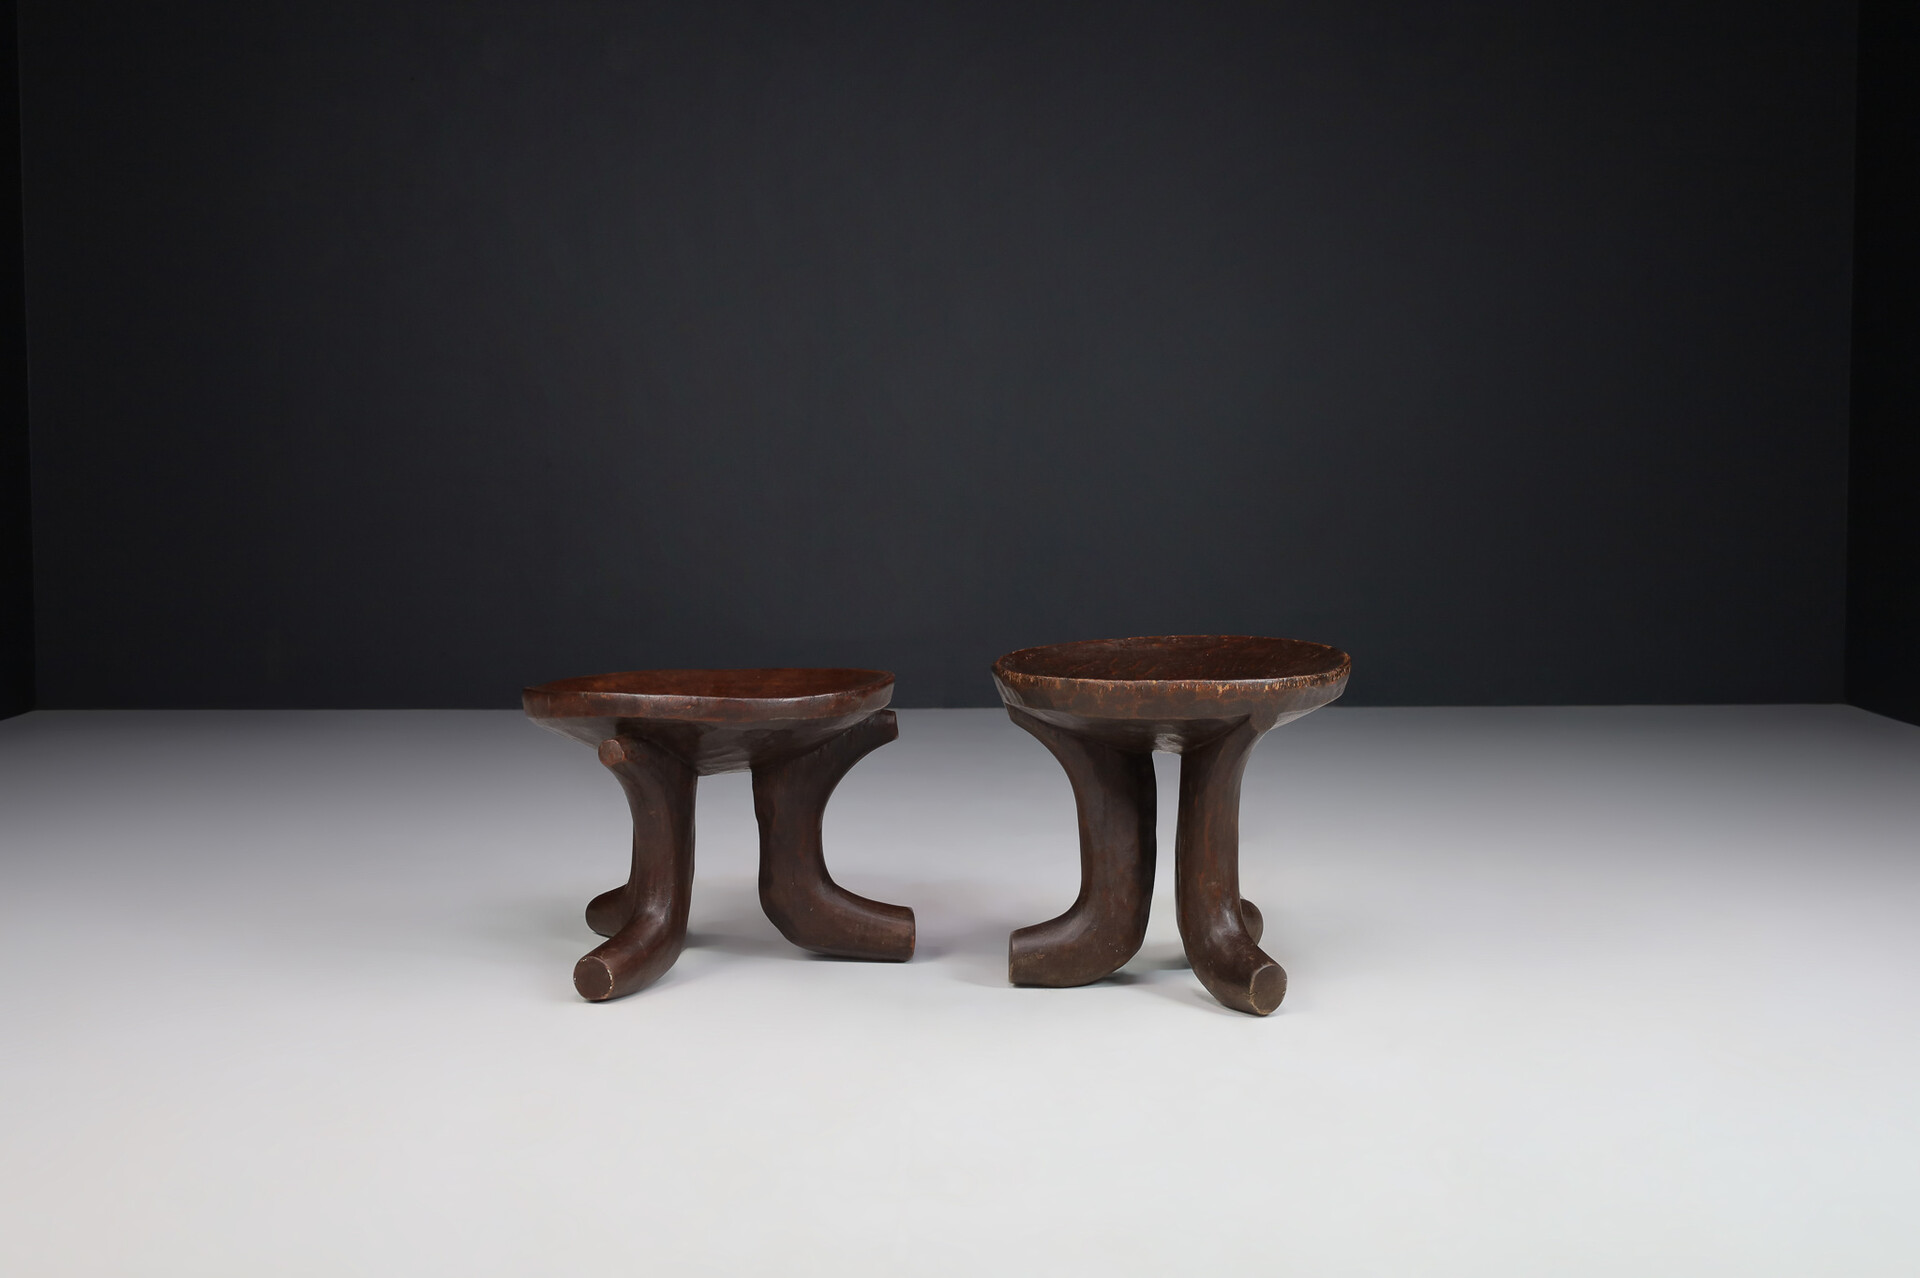 Art and craft OLD POKOT STOOLS WITH PATINA, Africa Kenya 1950s Mid-20th century